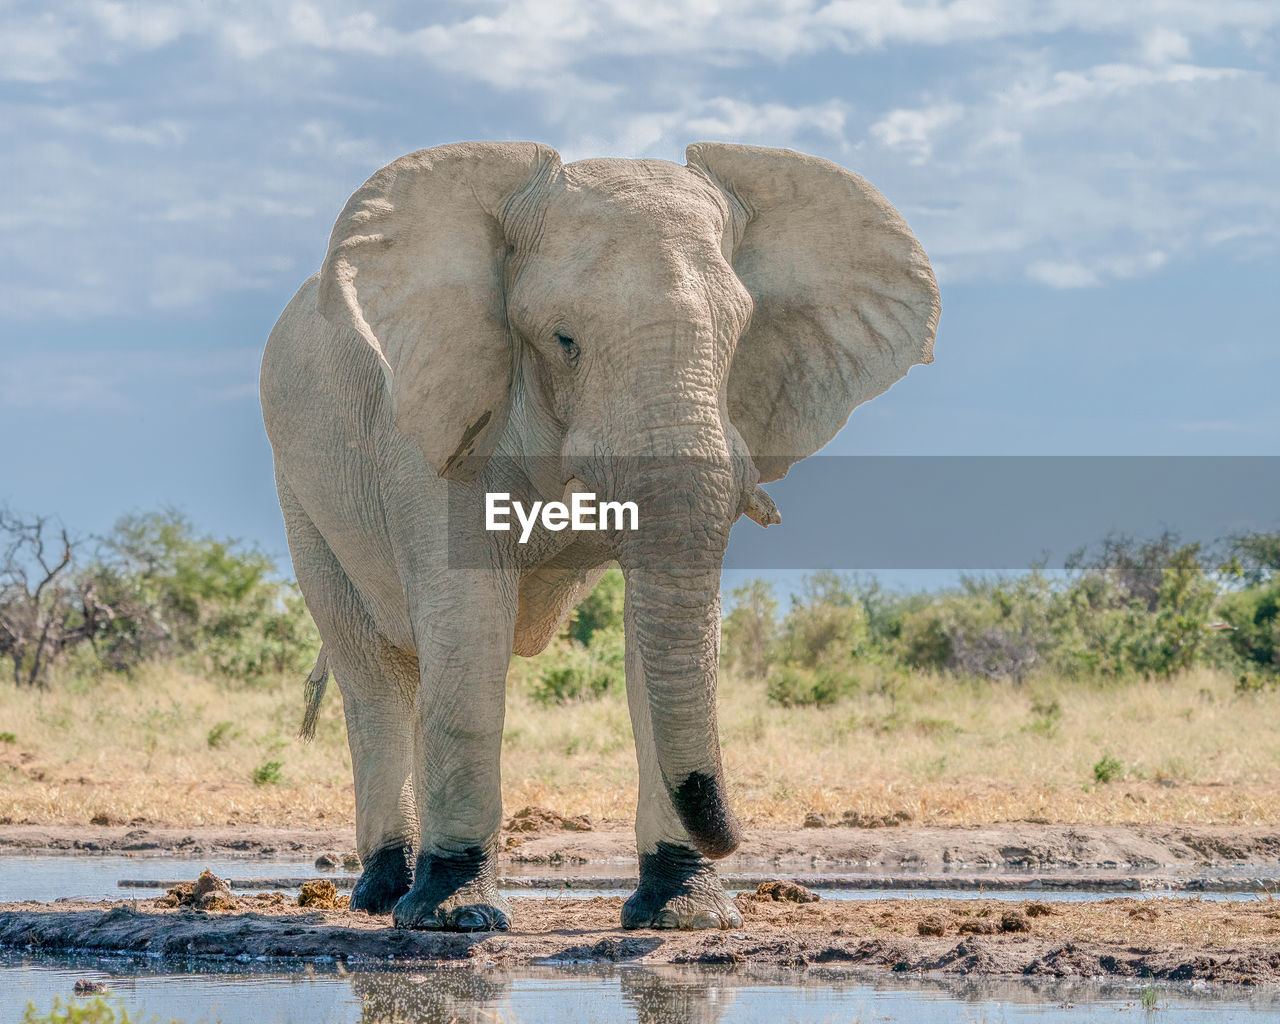 VIEW OF ELEPHANT DRINKING WATER